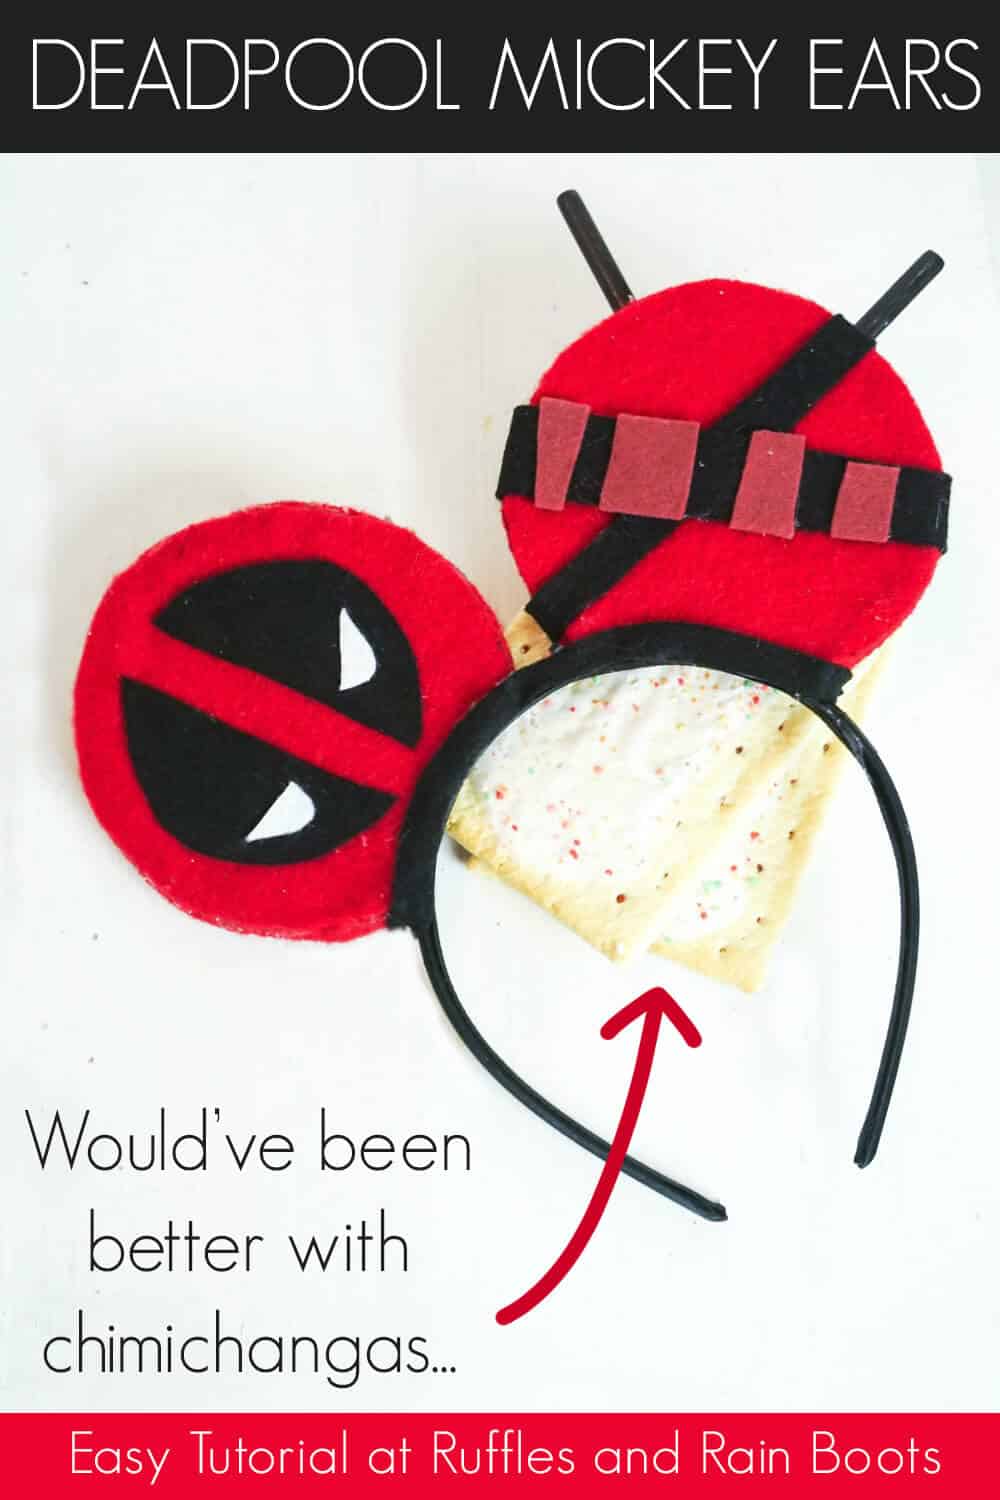 deadpool mickey mouse ears diy on a white background with poptarts with text which reads deadpool mickey ears would've been better with chimichangas